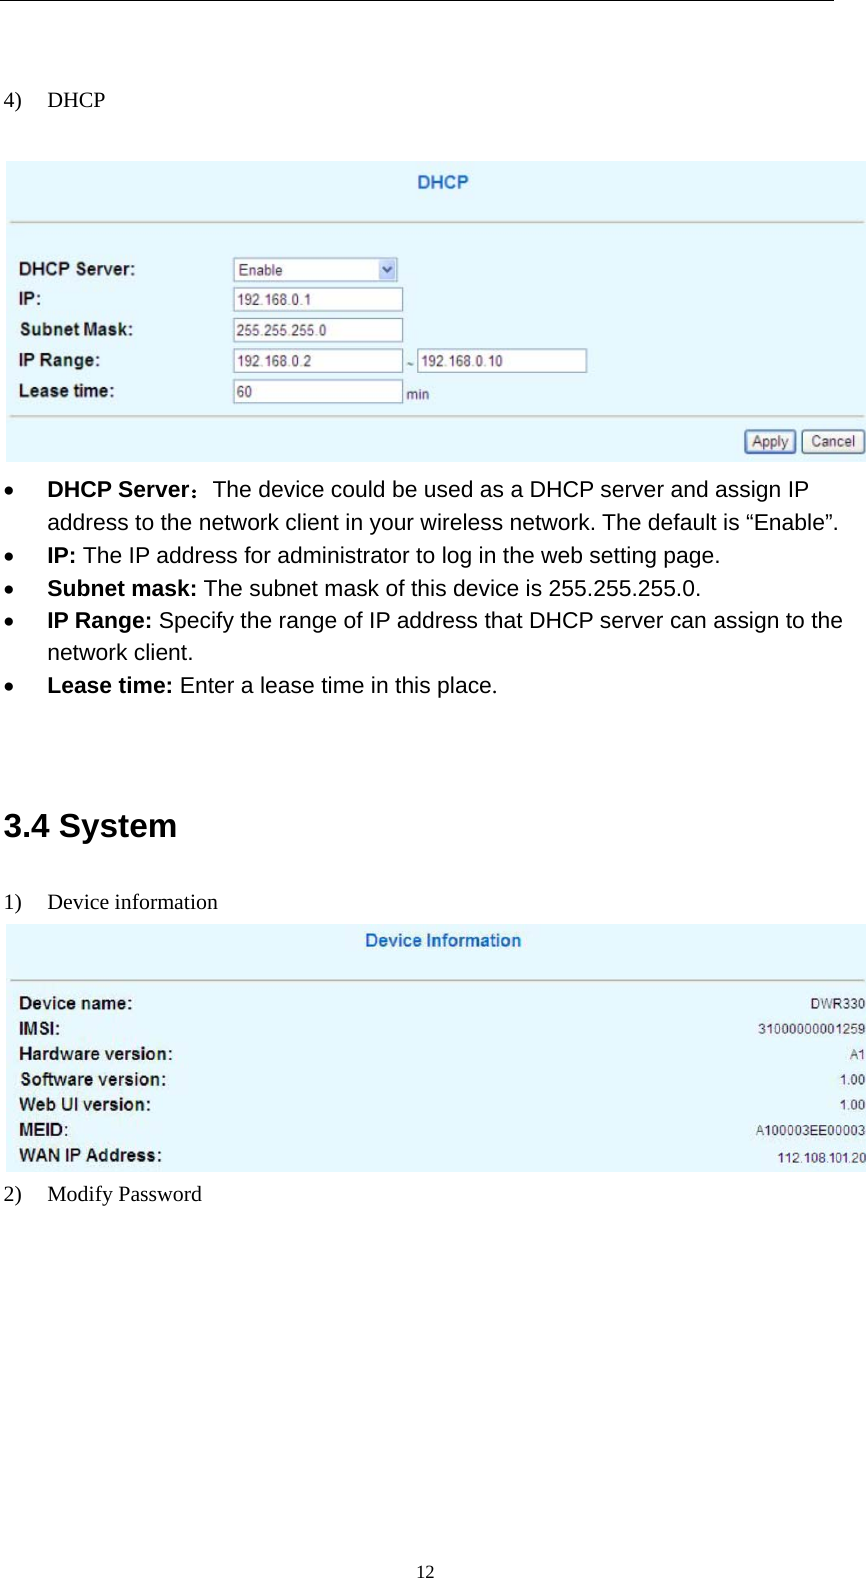   12 4) DHCP      DHCP Server：The device could be used as a DHCP server and assign IP address to the network client in your wireless network. The default is “Enable”.  IP: The IP address for administrator to log in the web setting page.  Subnet mask: The subnet mask of this device is 255.255.255.0.  IP Range: Specify the range of IP address that DHCP server can assign to the network client.  Lease time: Enter a lease time in this place.   3.4 System 1) Device information  2) Modify Password 